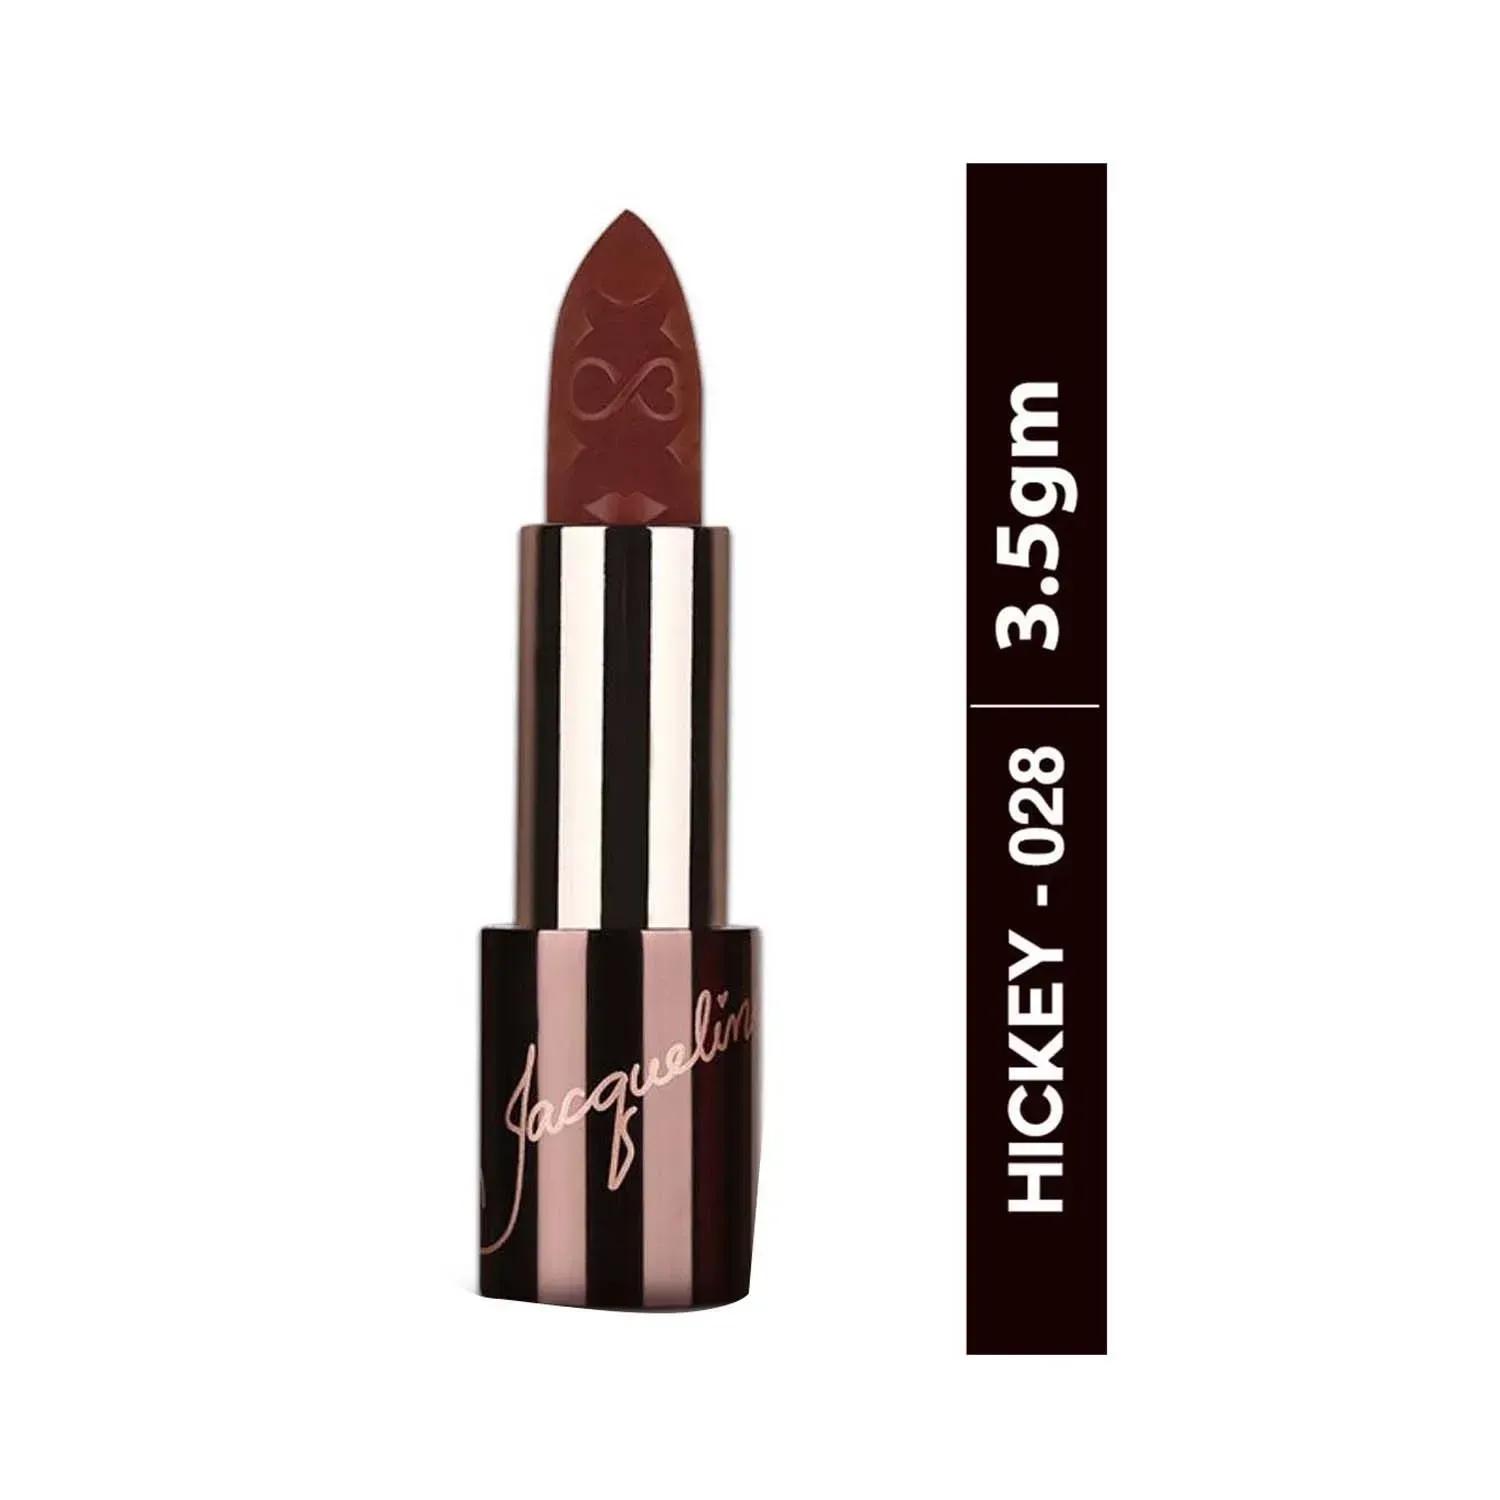 Colorbar X Jacqueline Sinful Matte Lipcolor - 028 Hickey (3.5g)